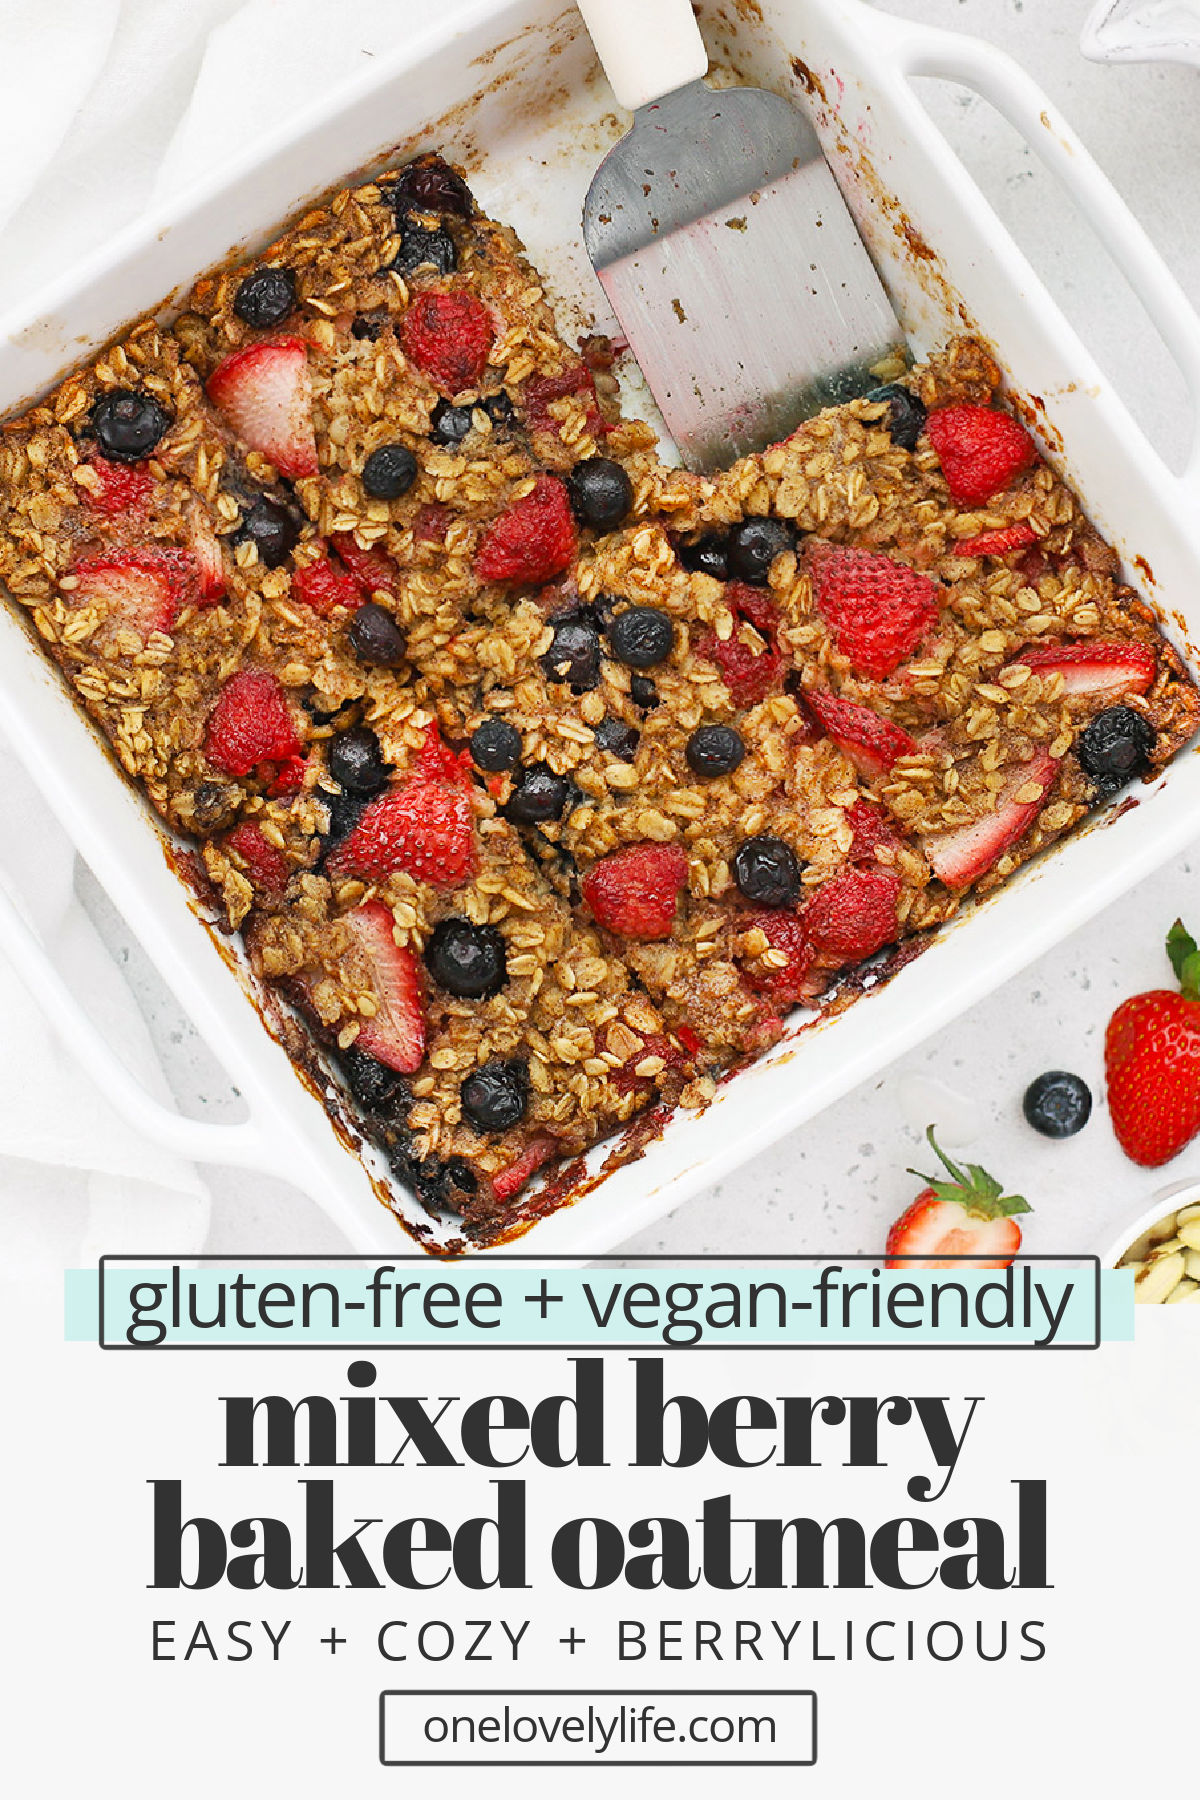 Mixed Berry Baked Oatmeal! This triple berry baked oatmeal recipe is a delightful healthy meal prep breakfast perfect for a crowd. (Gluten-Free, Vegan-Friendly) // Healthy Berry Baked Oatmeal // Vegan Berry Baked Oatmeal // Gluten-Free Berry Baked Oatmeal // Meal Prep Breakfast Recipe // Baked Oatmeal Recipe // Spring Breakfast #glutenfree #bakedoatmeal #berries #oatmeal #vegan